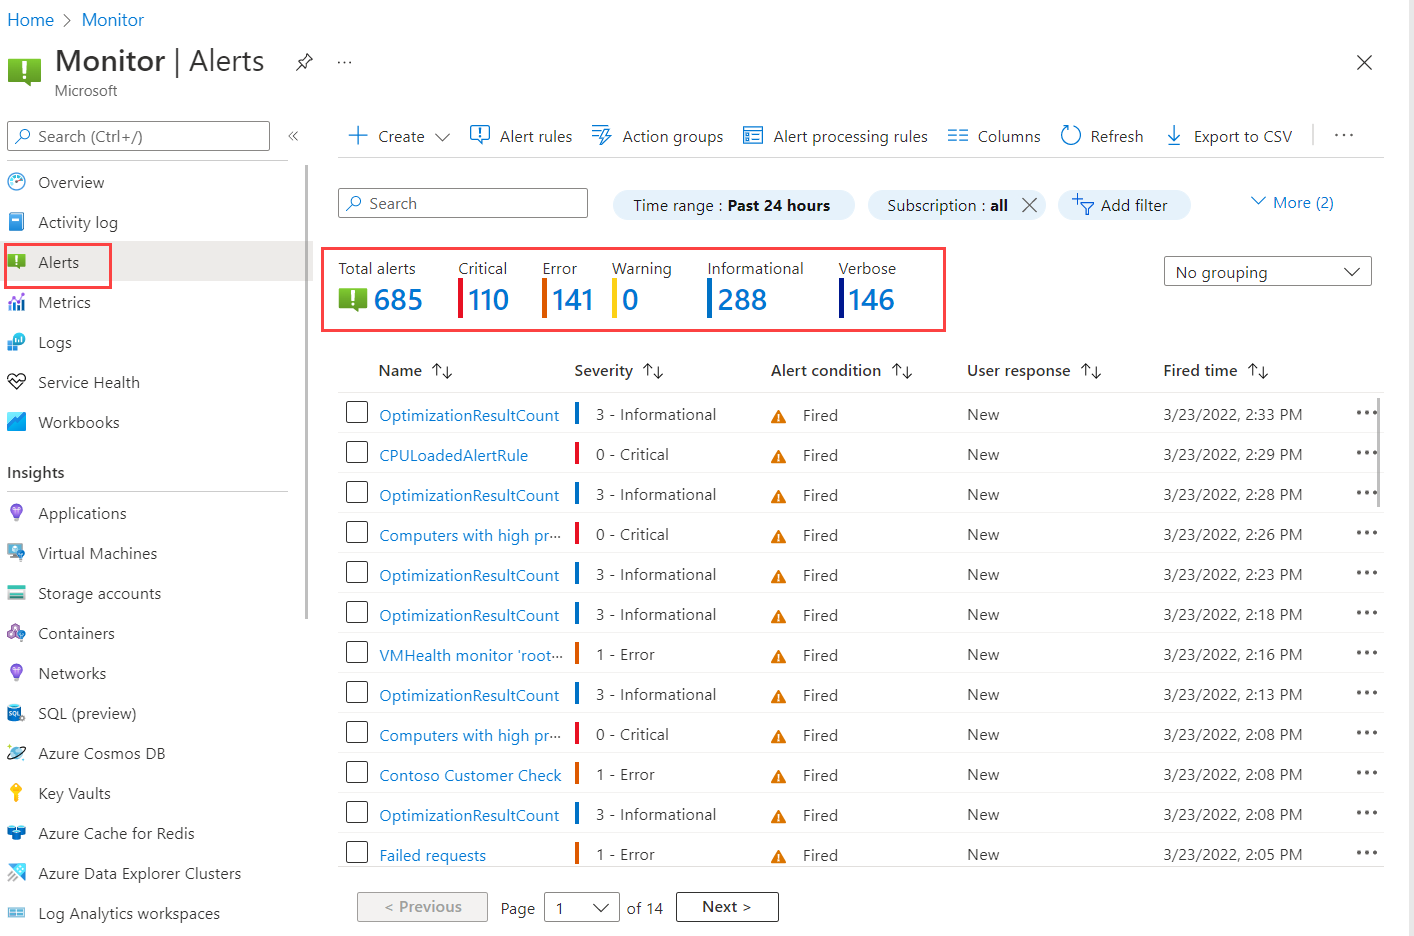 Screenshot that shows the Alerts summary page in the Azure portal.